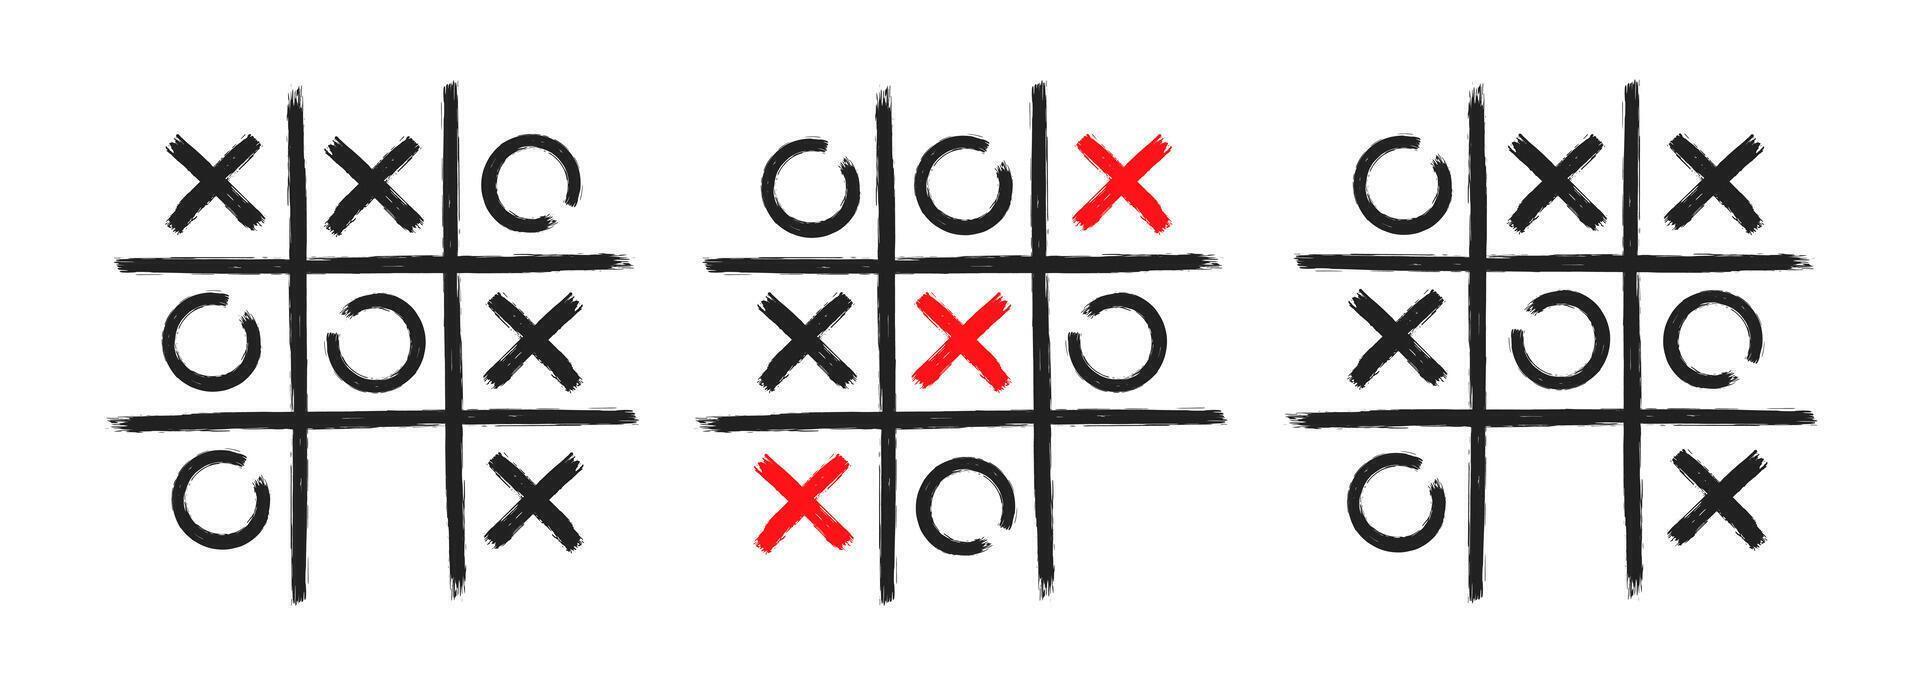 Tic tac toe xo game hand drawn grid doodle template vector illustration set isolated on white background